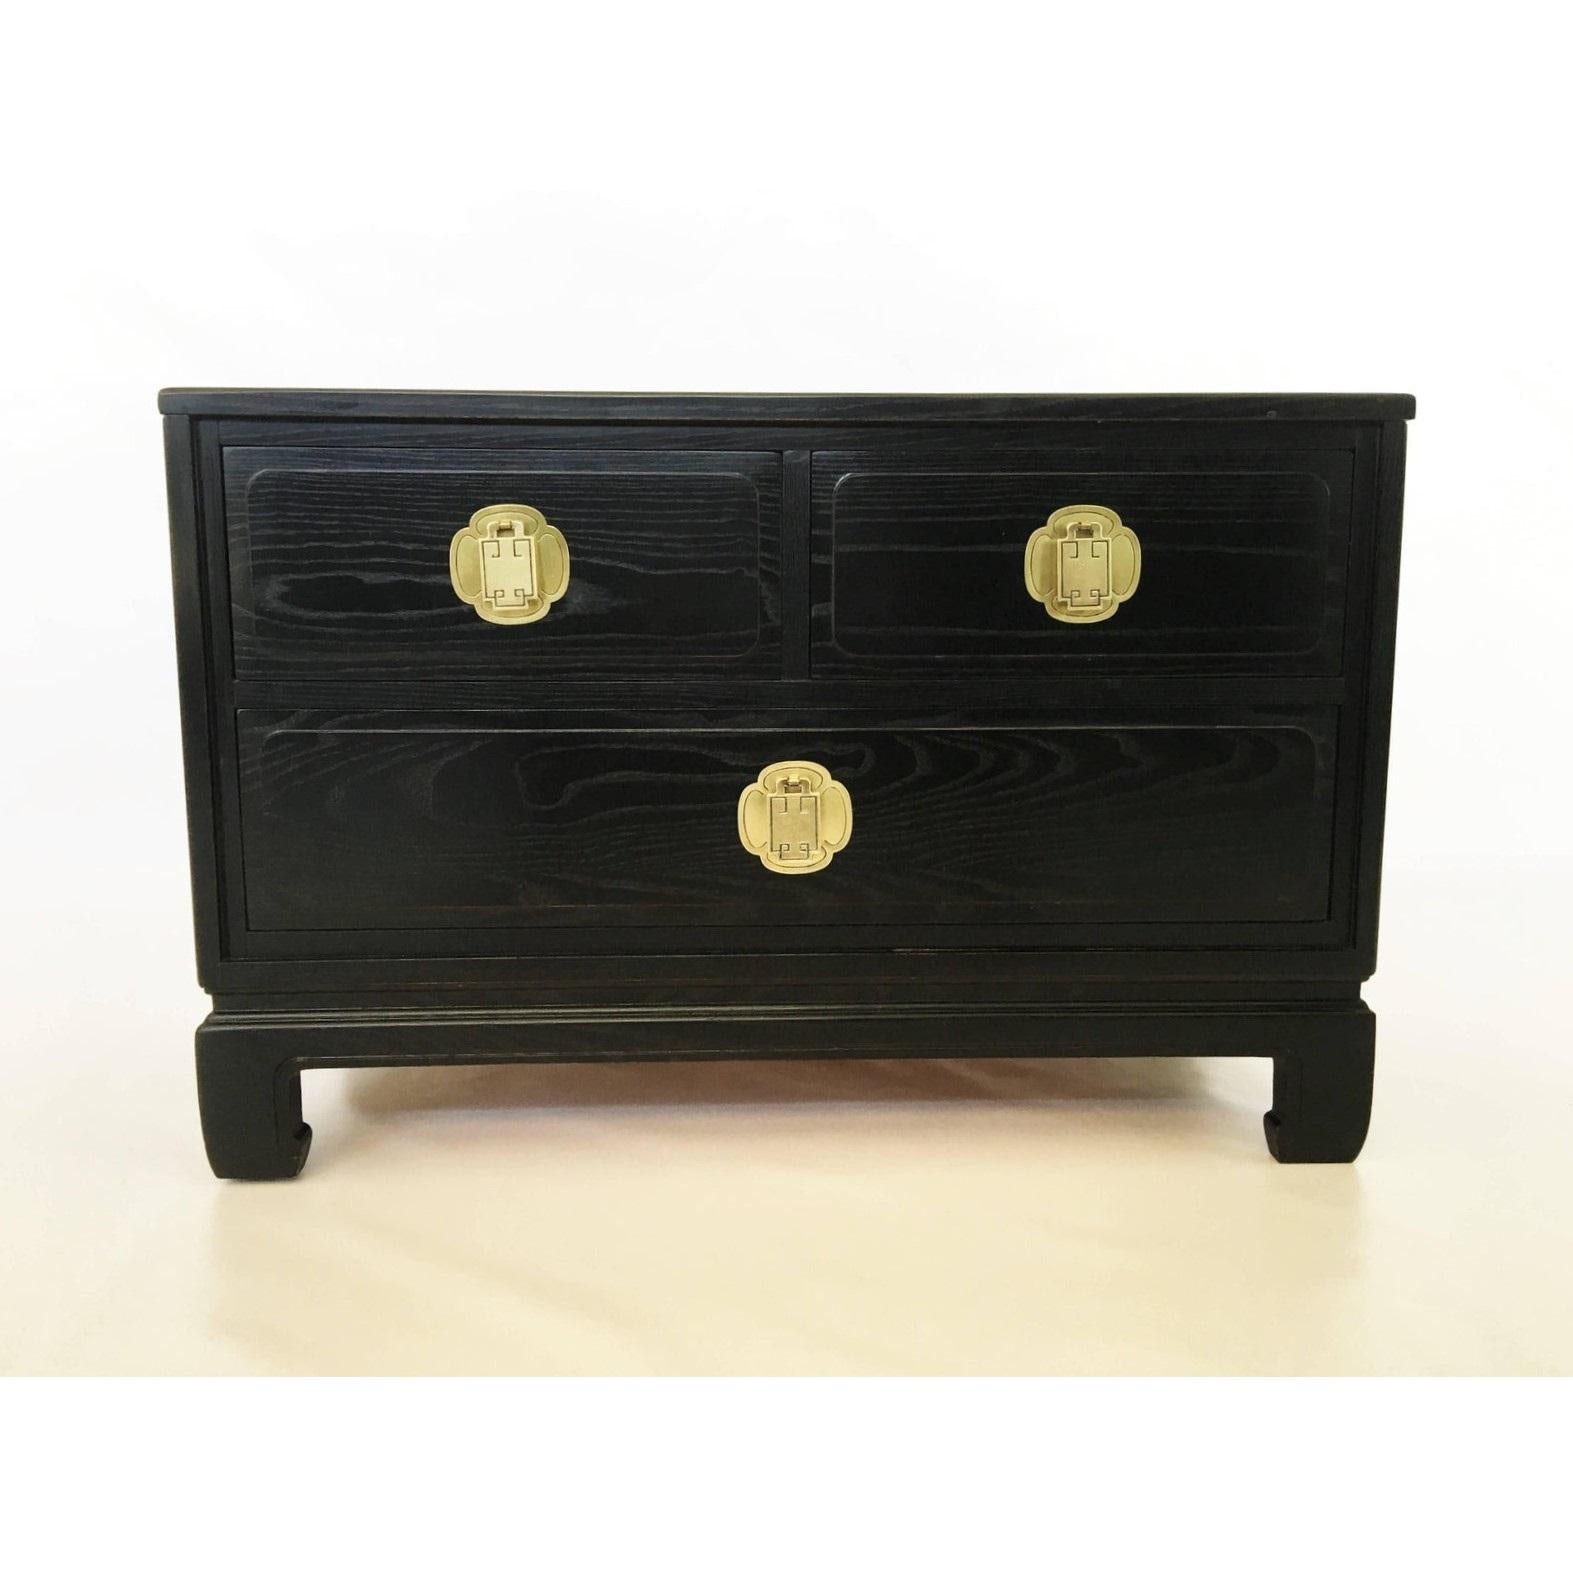 Pair of nightstands featured in cerused oak by Davis Cabinet Company. These Asian style bedside tables have a raised base, dovetailed joinery and carved trim. The cerused oak has acquired a wonderful aged patina and still looks great. These are well